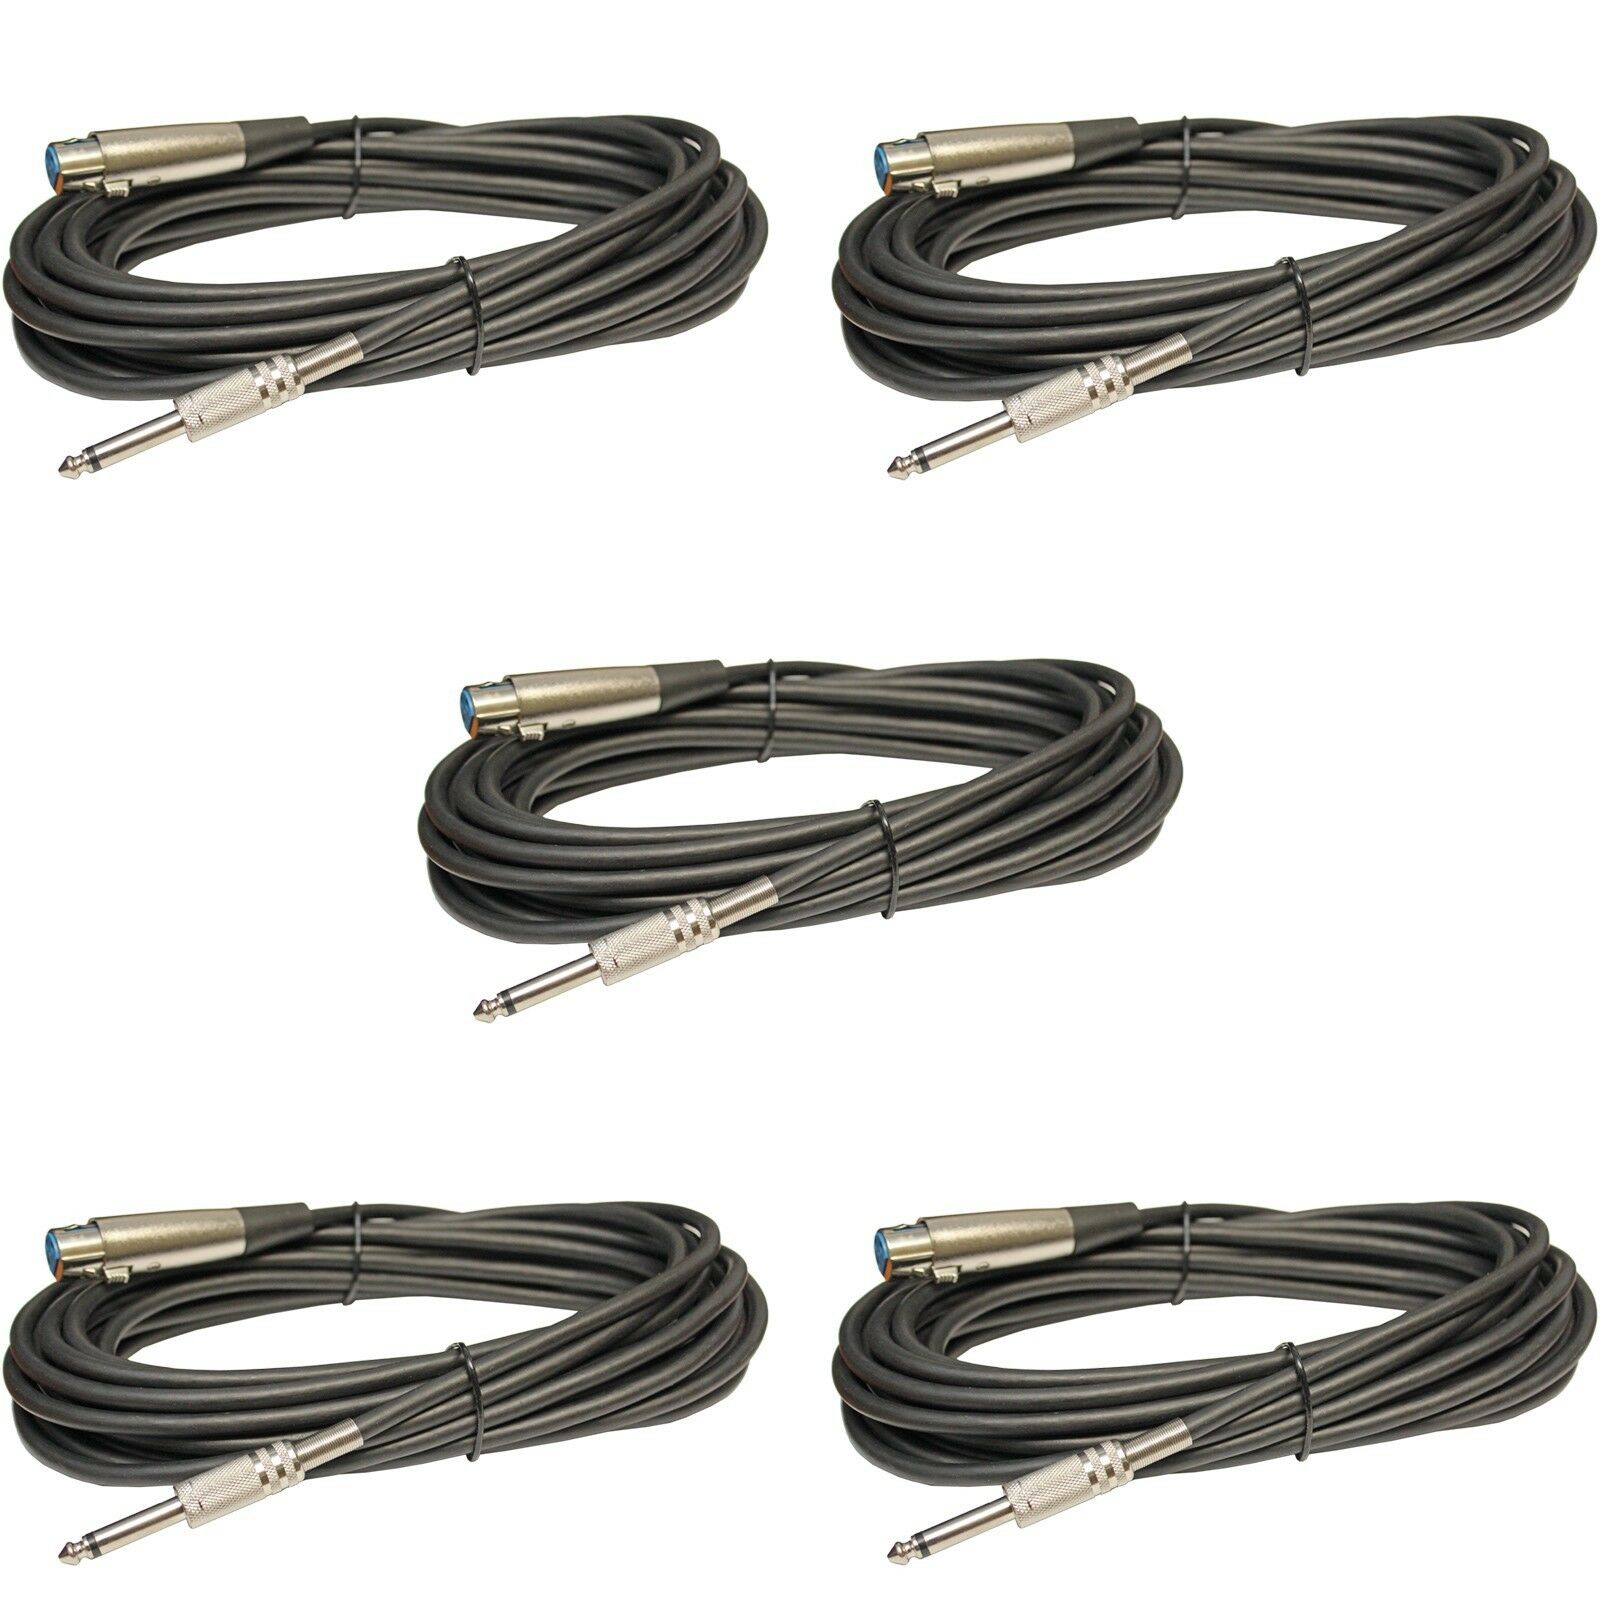 5 Pack 25ft Xlr Female To 1/4" Mono Shielded Karaoke Microphone Mic Cable Cord